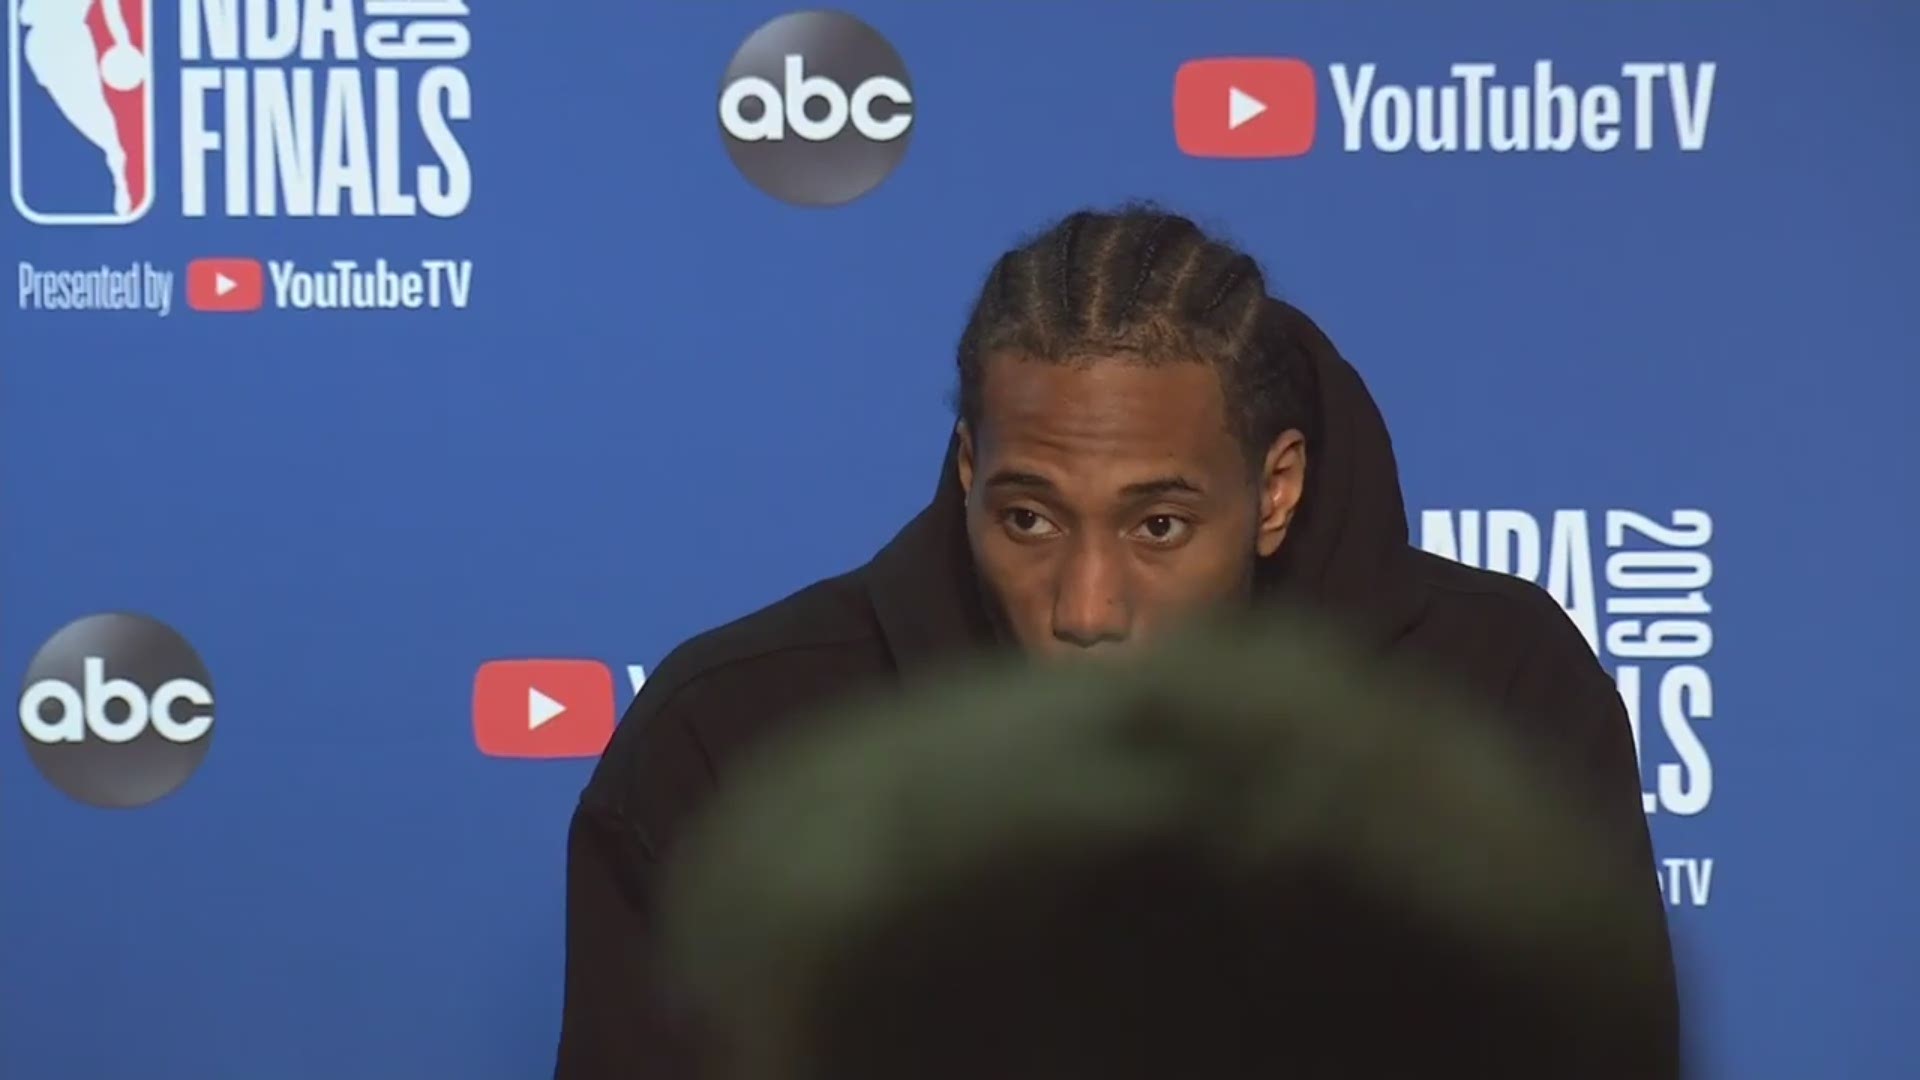 Raptors forward Kawhi Leonard talks about Friday's victory over the Warriors in Oakland in Game 4 of the NBA Finals to take a 3-1 series lead back to Toronto.